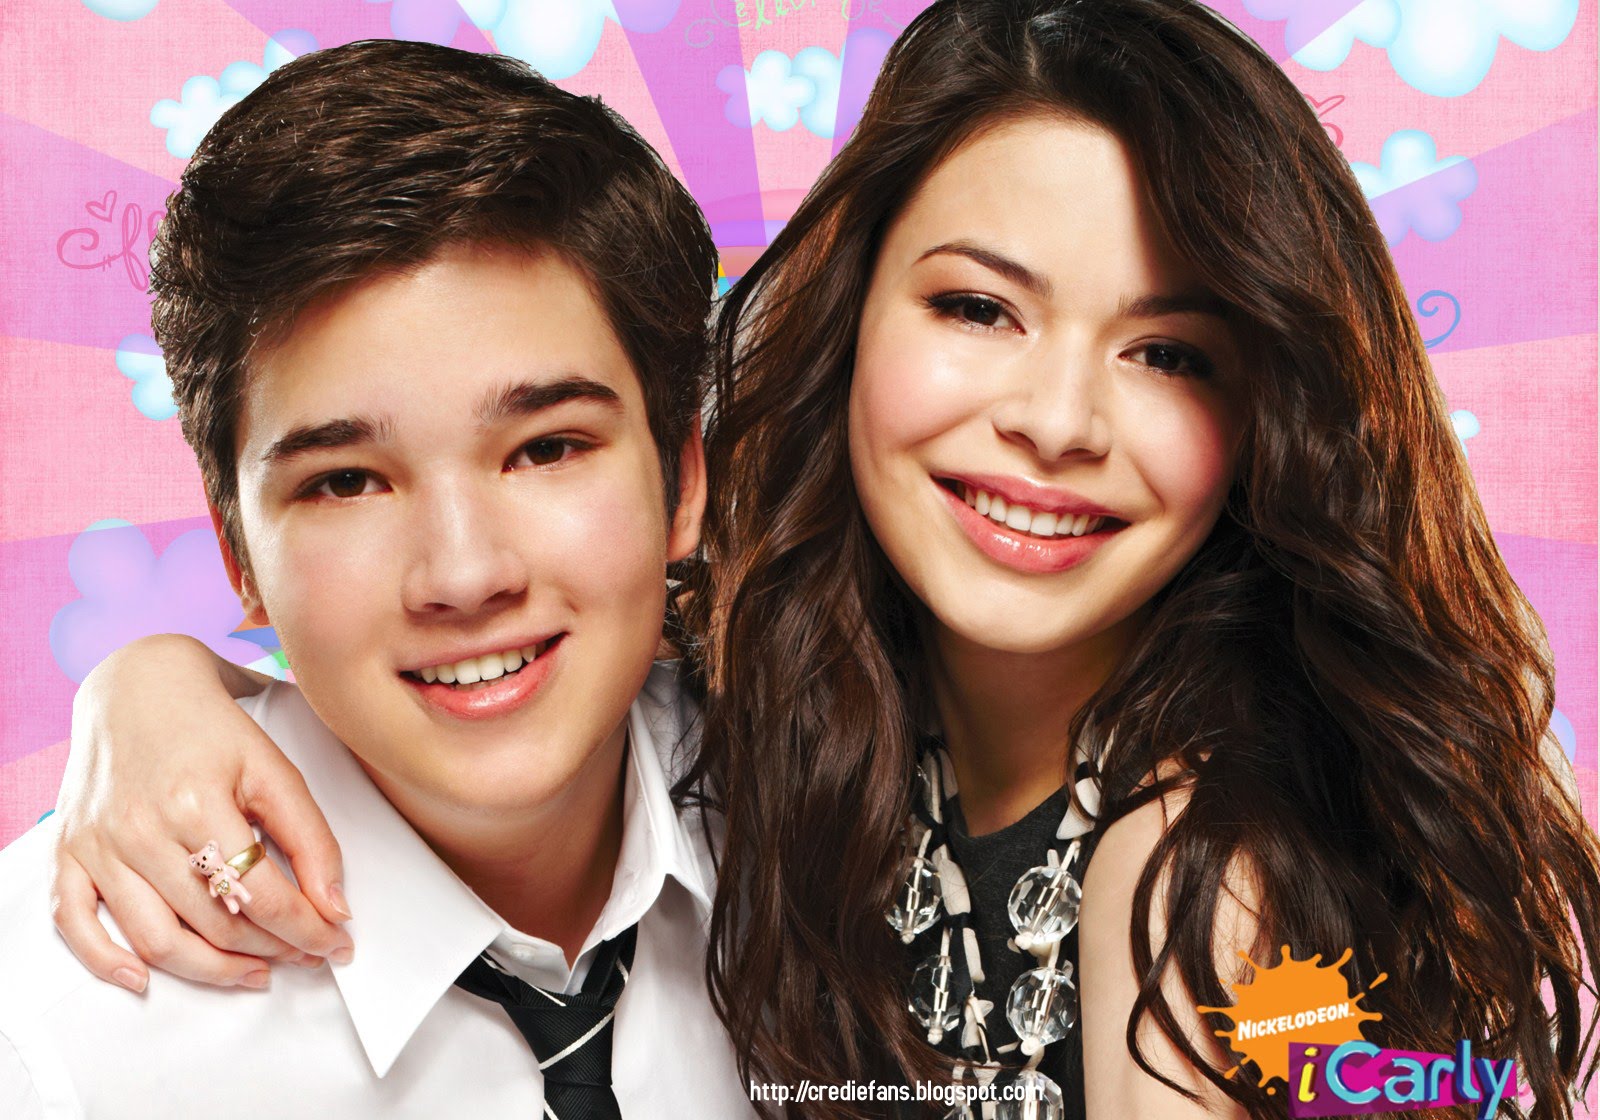 Icarly Wallpaper For